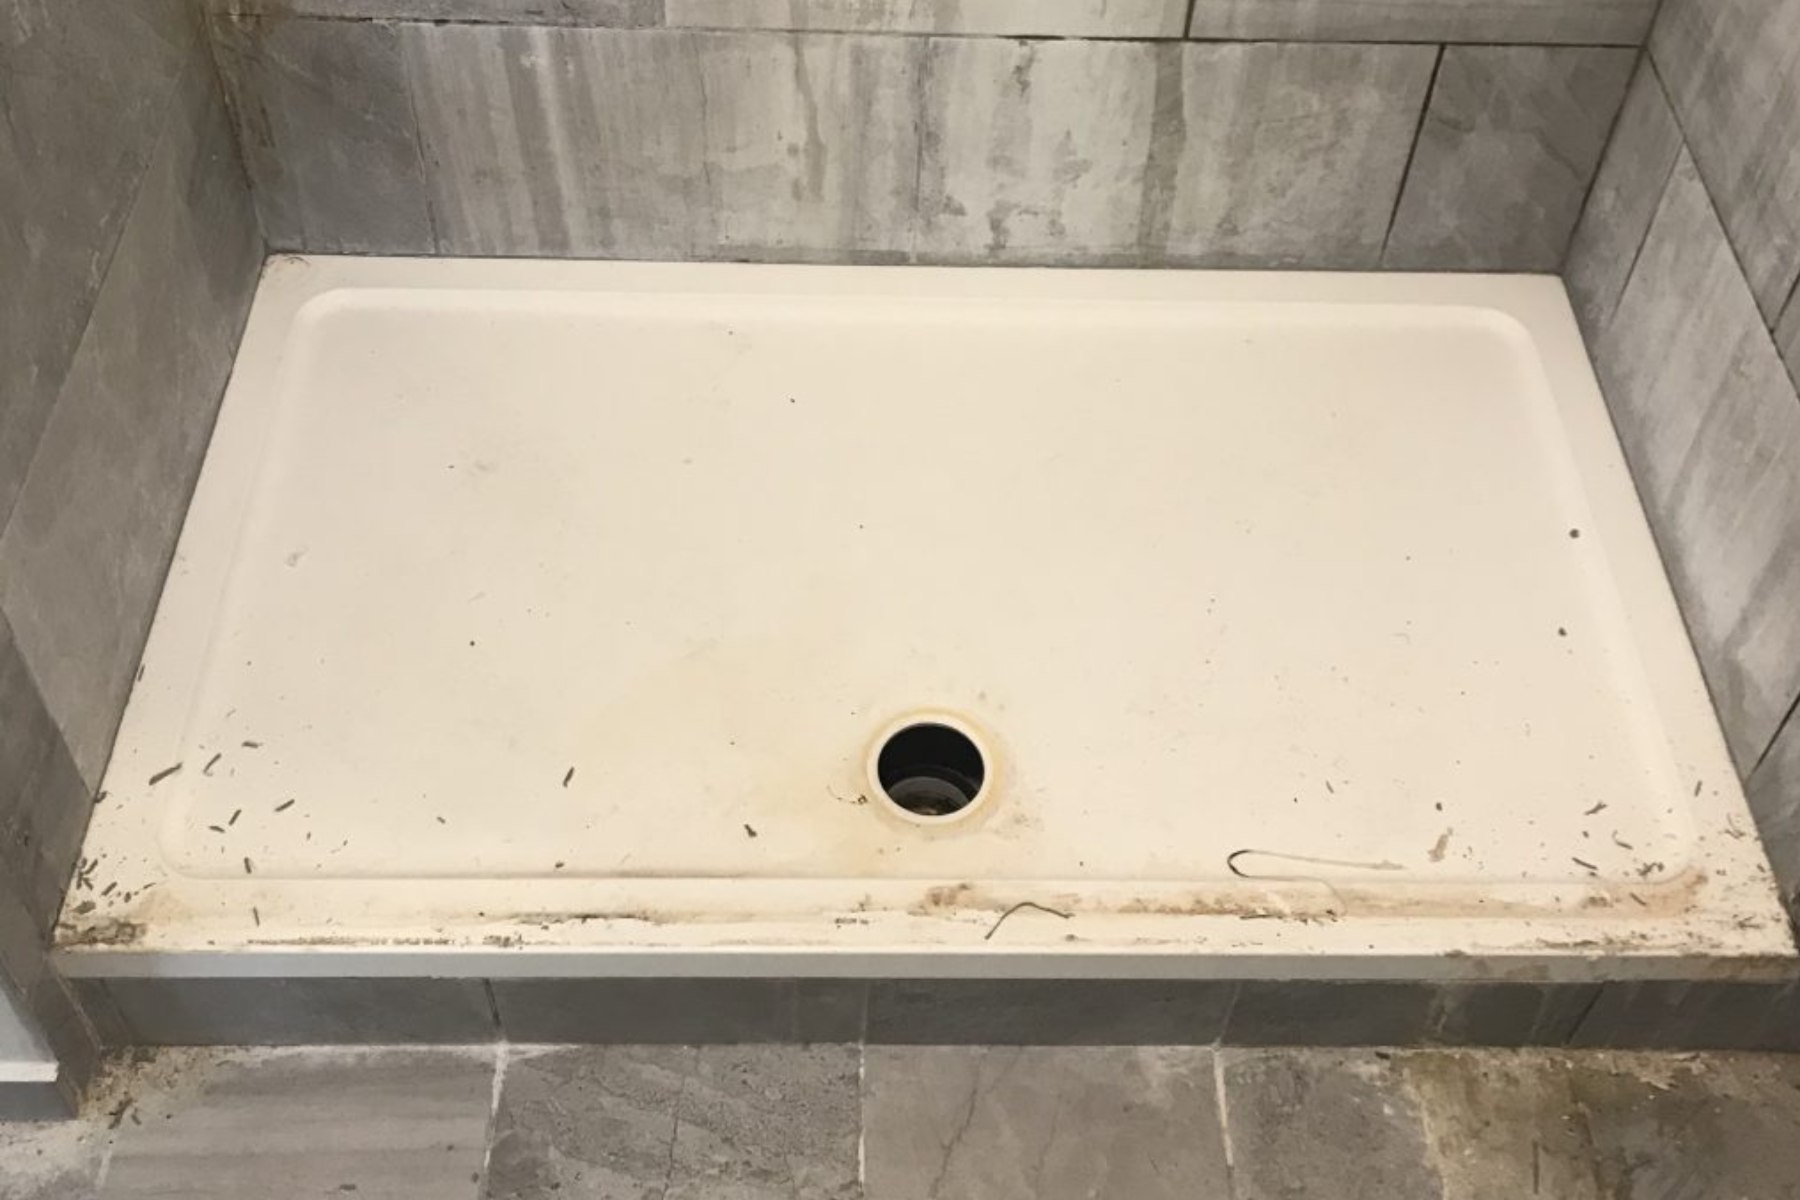 Rusting Shower Tray Before Getting Clean In Shower Room